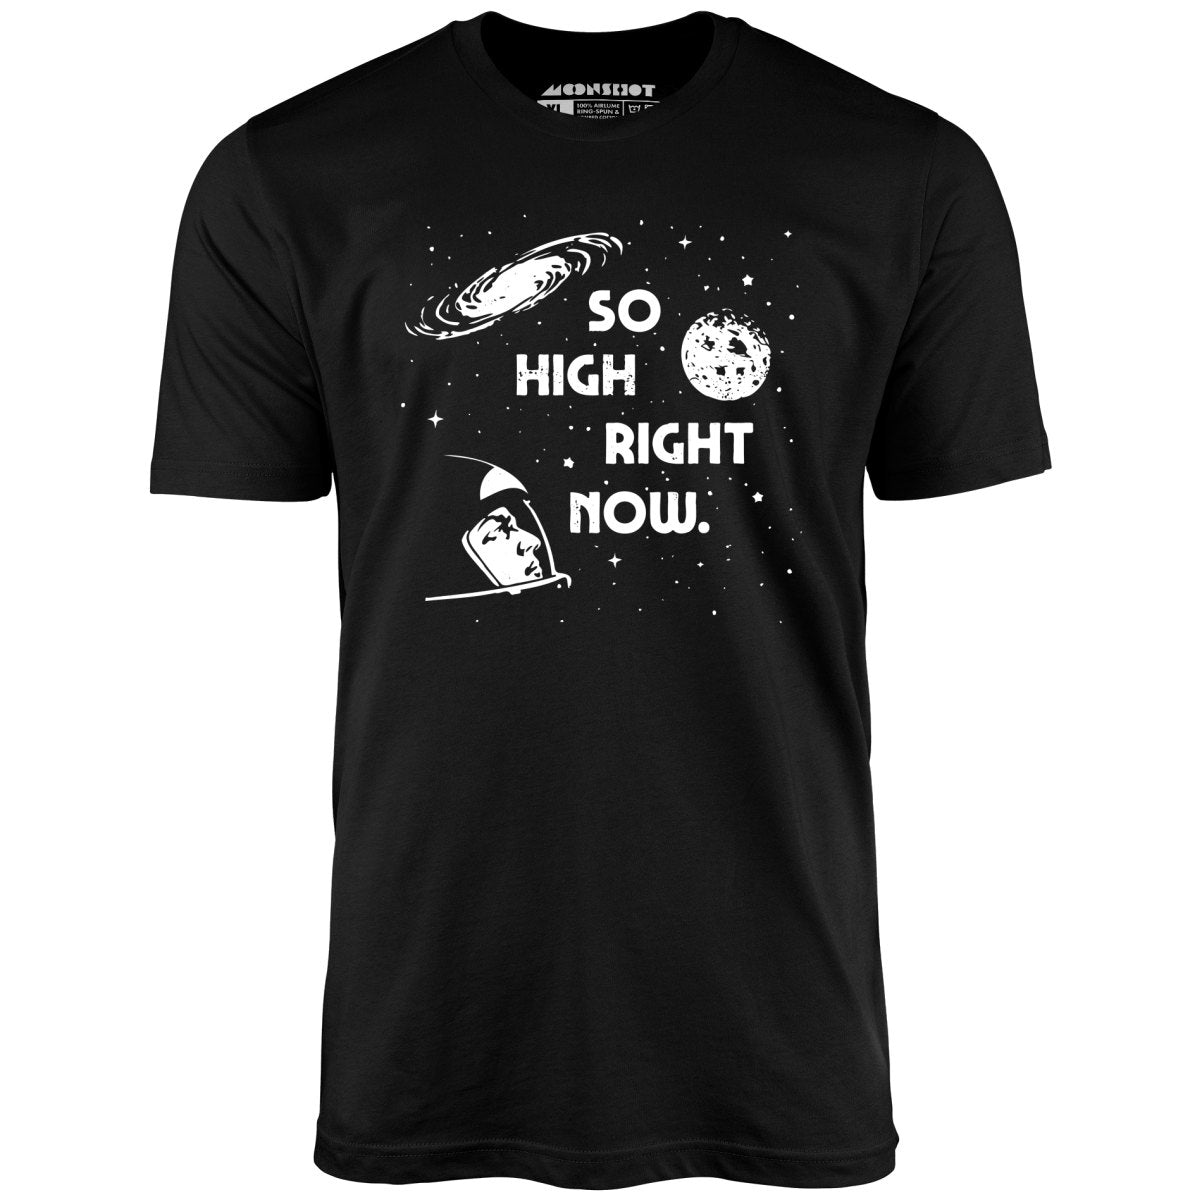 So High Right Now - Unisex T-Shirt